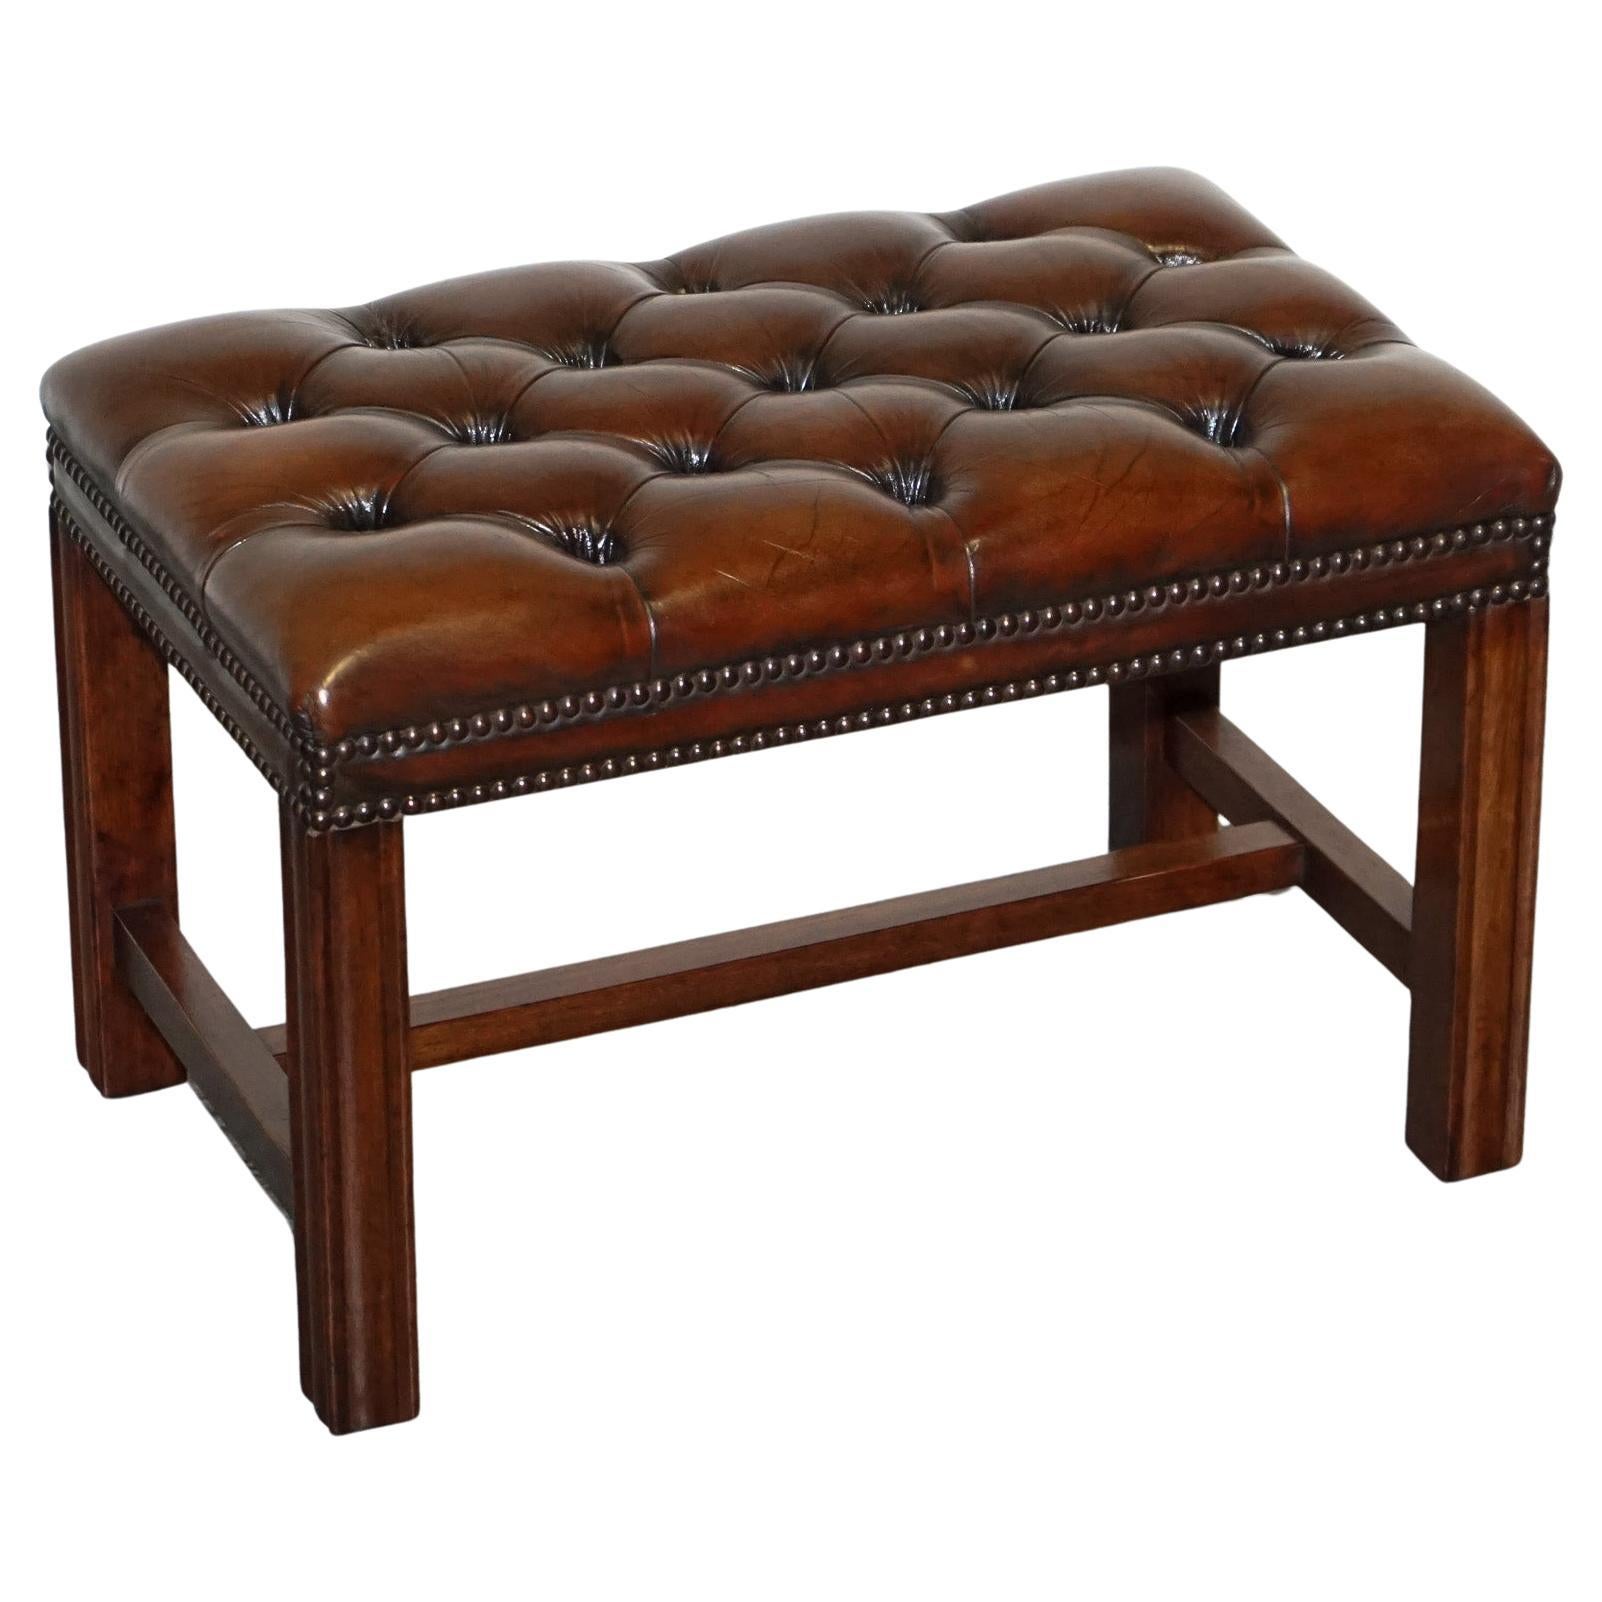 VINTAGE RESTORED CHESTERFiELD HAND DYED BROWN LEATHER TUFFED FOOTSTOOL (2/2)